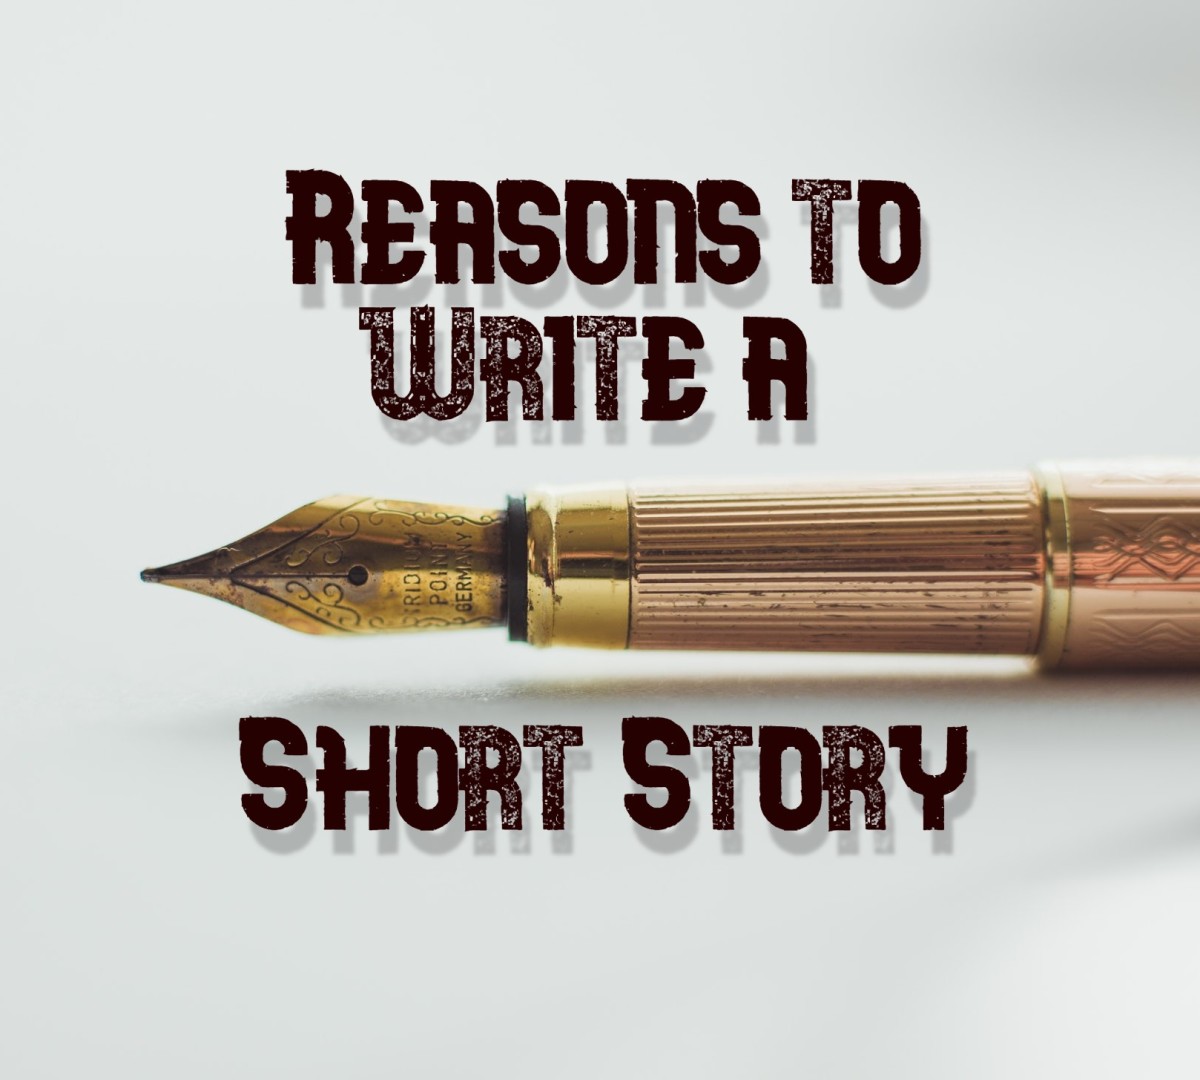 6 Reasons to Write a Short Story